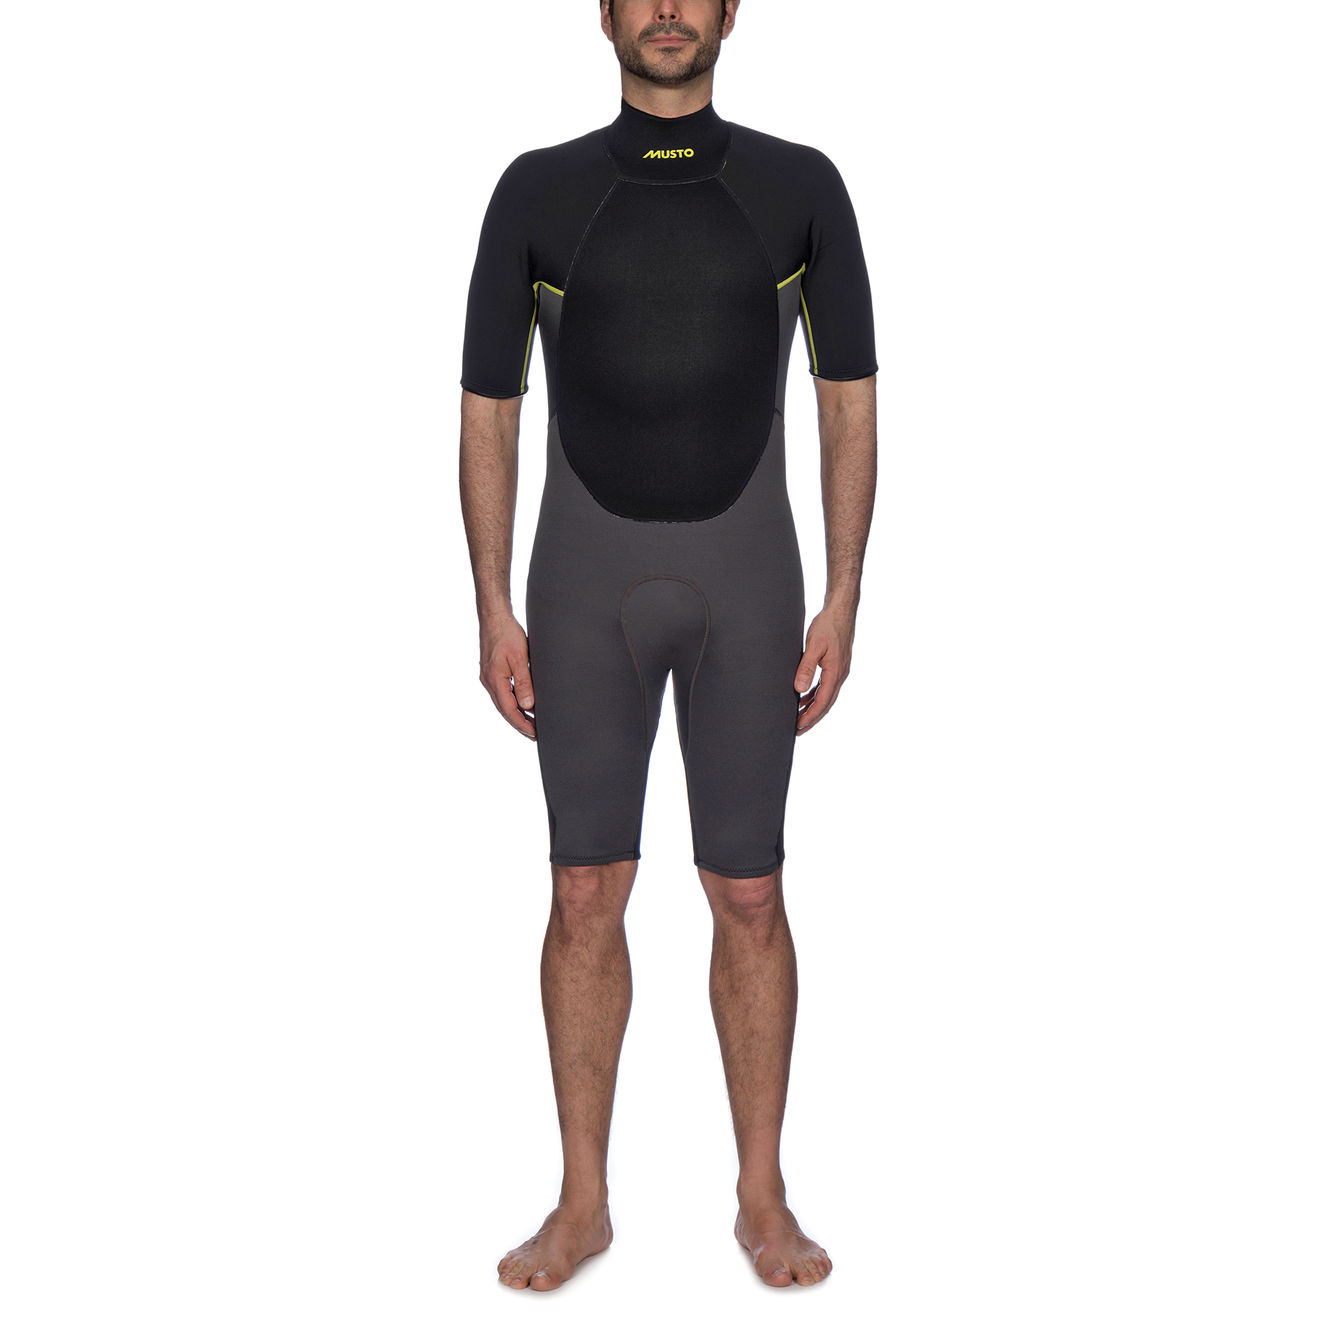 Championship Shorty Wetsuit Review